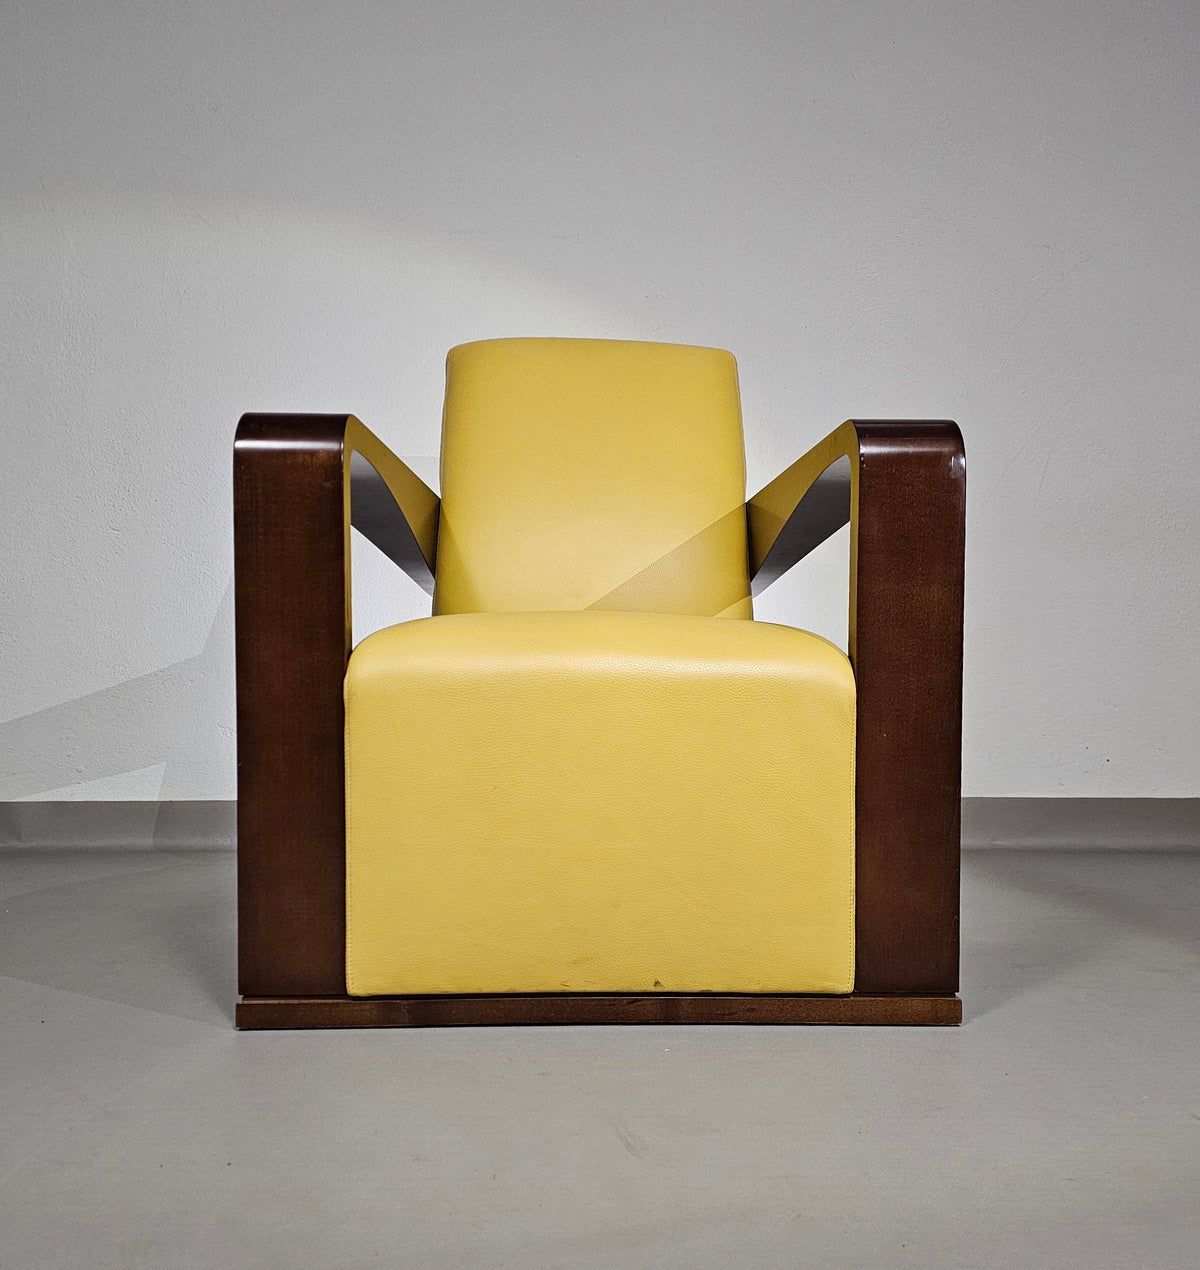 Hugues Chevalier
Beautiful condition / 2 x Ying armchair / Hurgues Chevalier / leather / by Chafik Gasmi